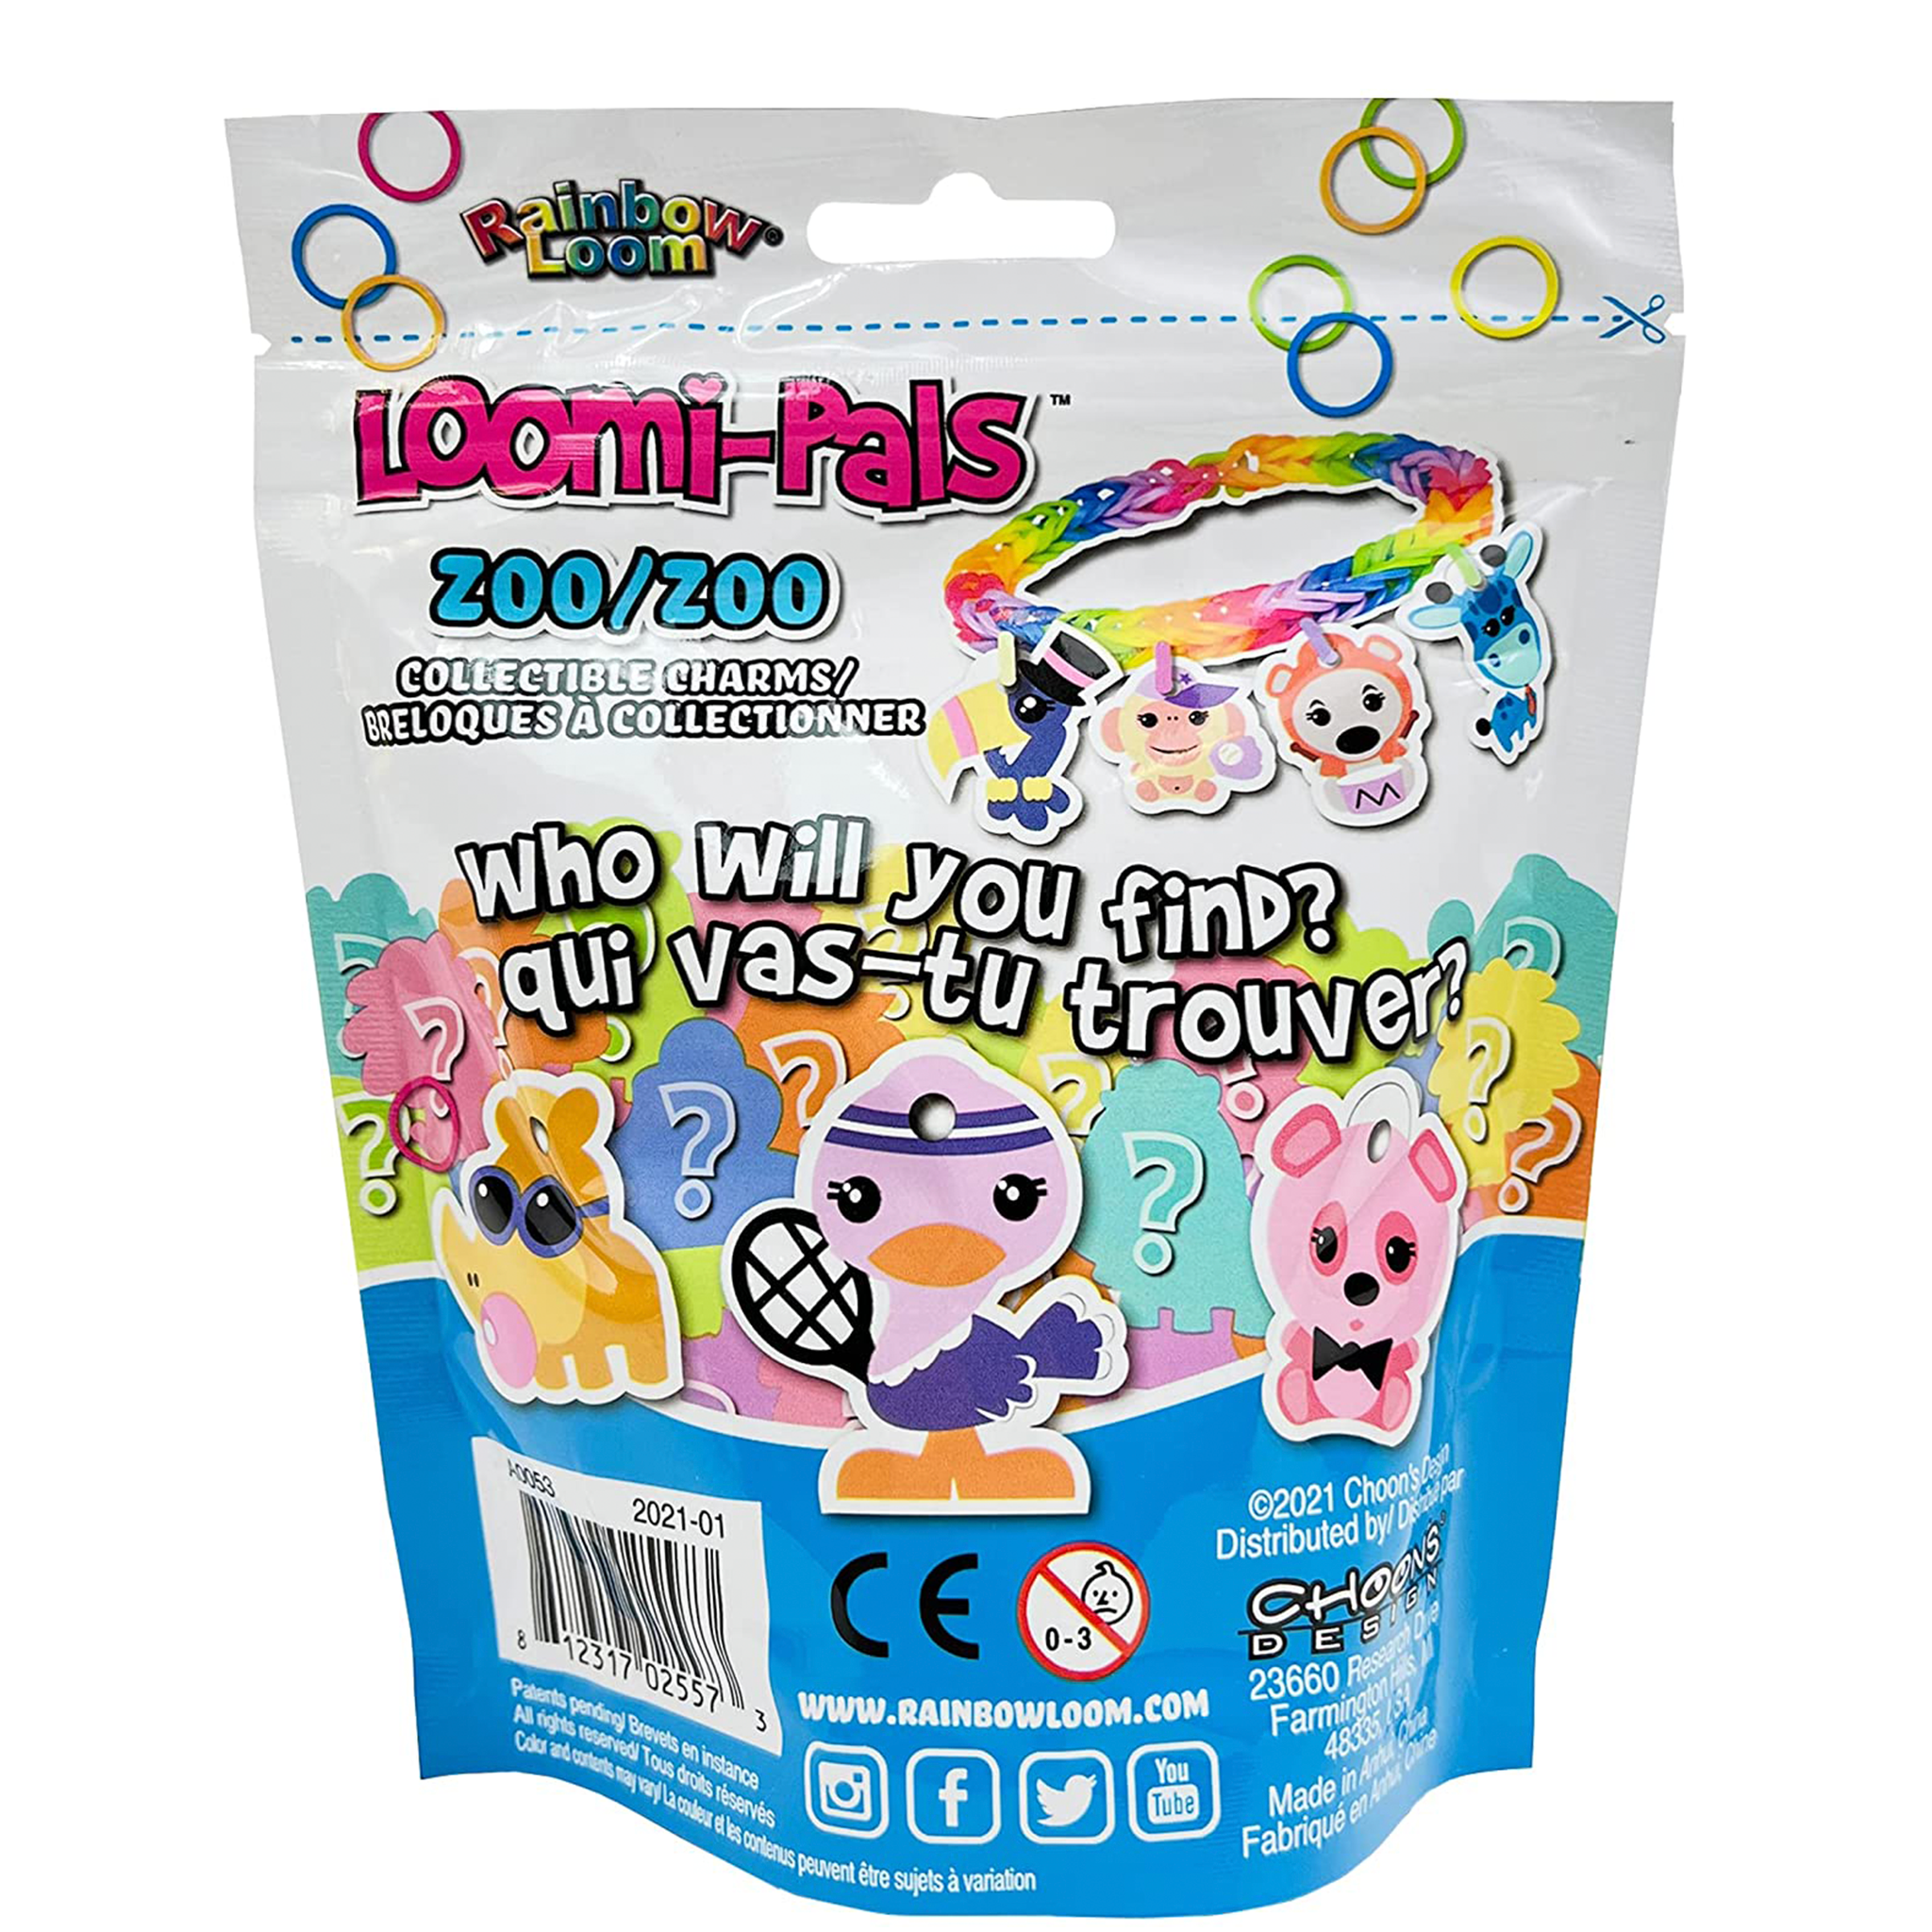 Loomi-Pals Collectible Charm Bracelet Kit - Food - Imagination Toys